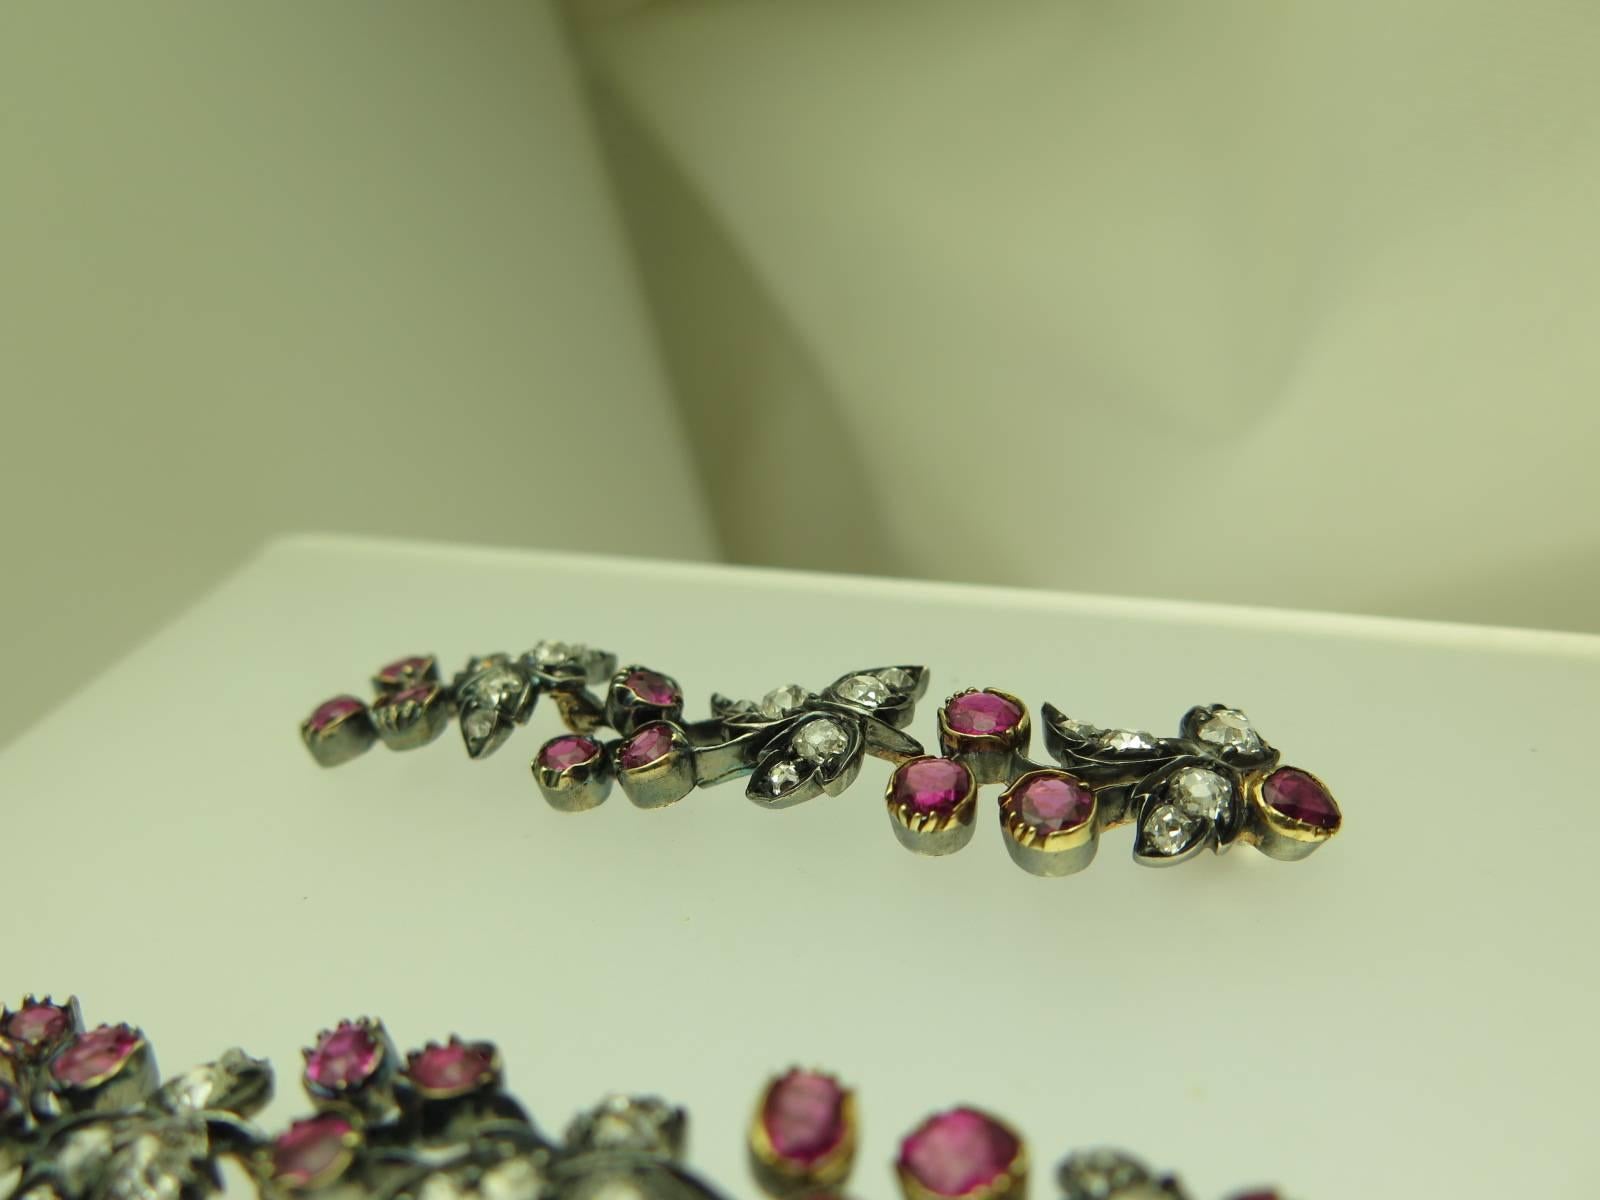 Each pendant earring designed as a fruiting vine set with circular and cushion-shaped rubies and old mine-cut diamonds, mounted in silver and gold, post and butterfly fittings 